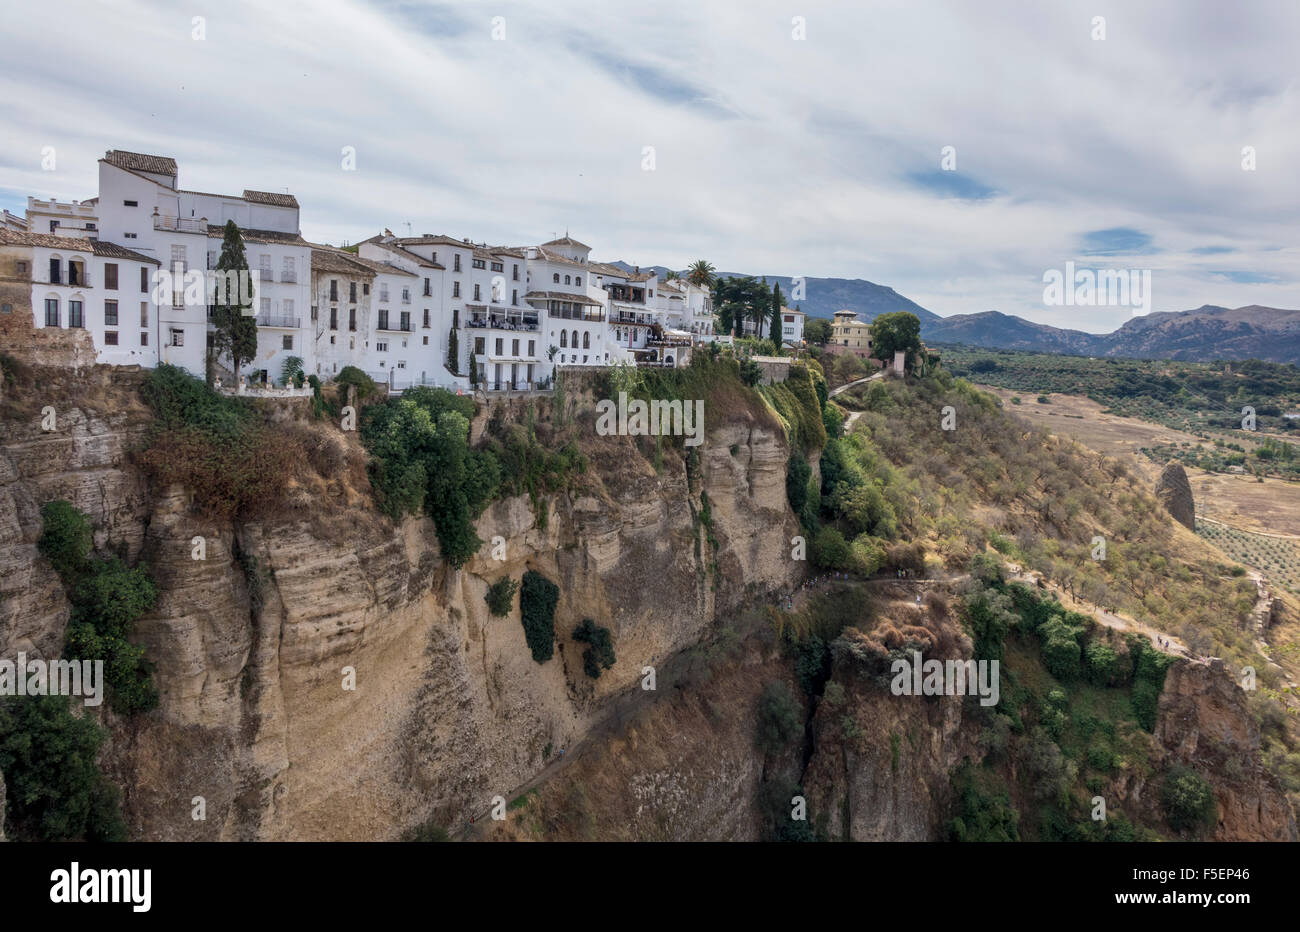 Old town buildings cling to rock face over El Tajo gorge at Ronda, Andalucia, Spain Stock Photo